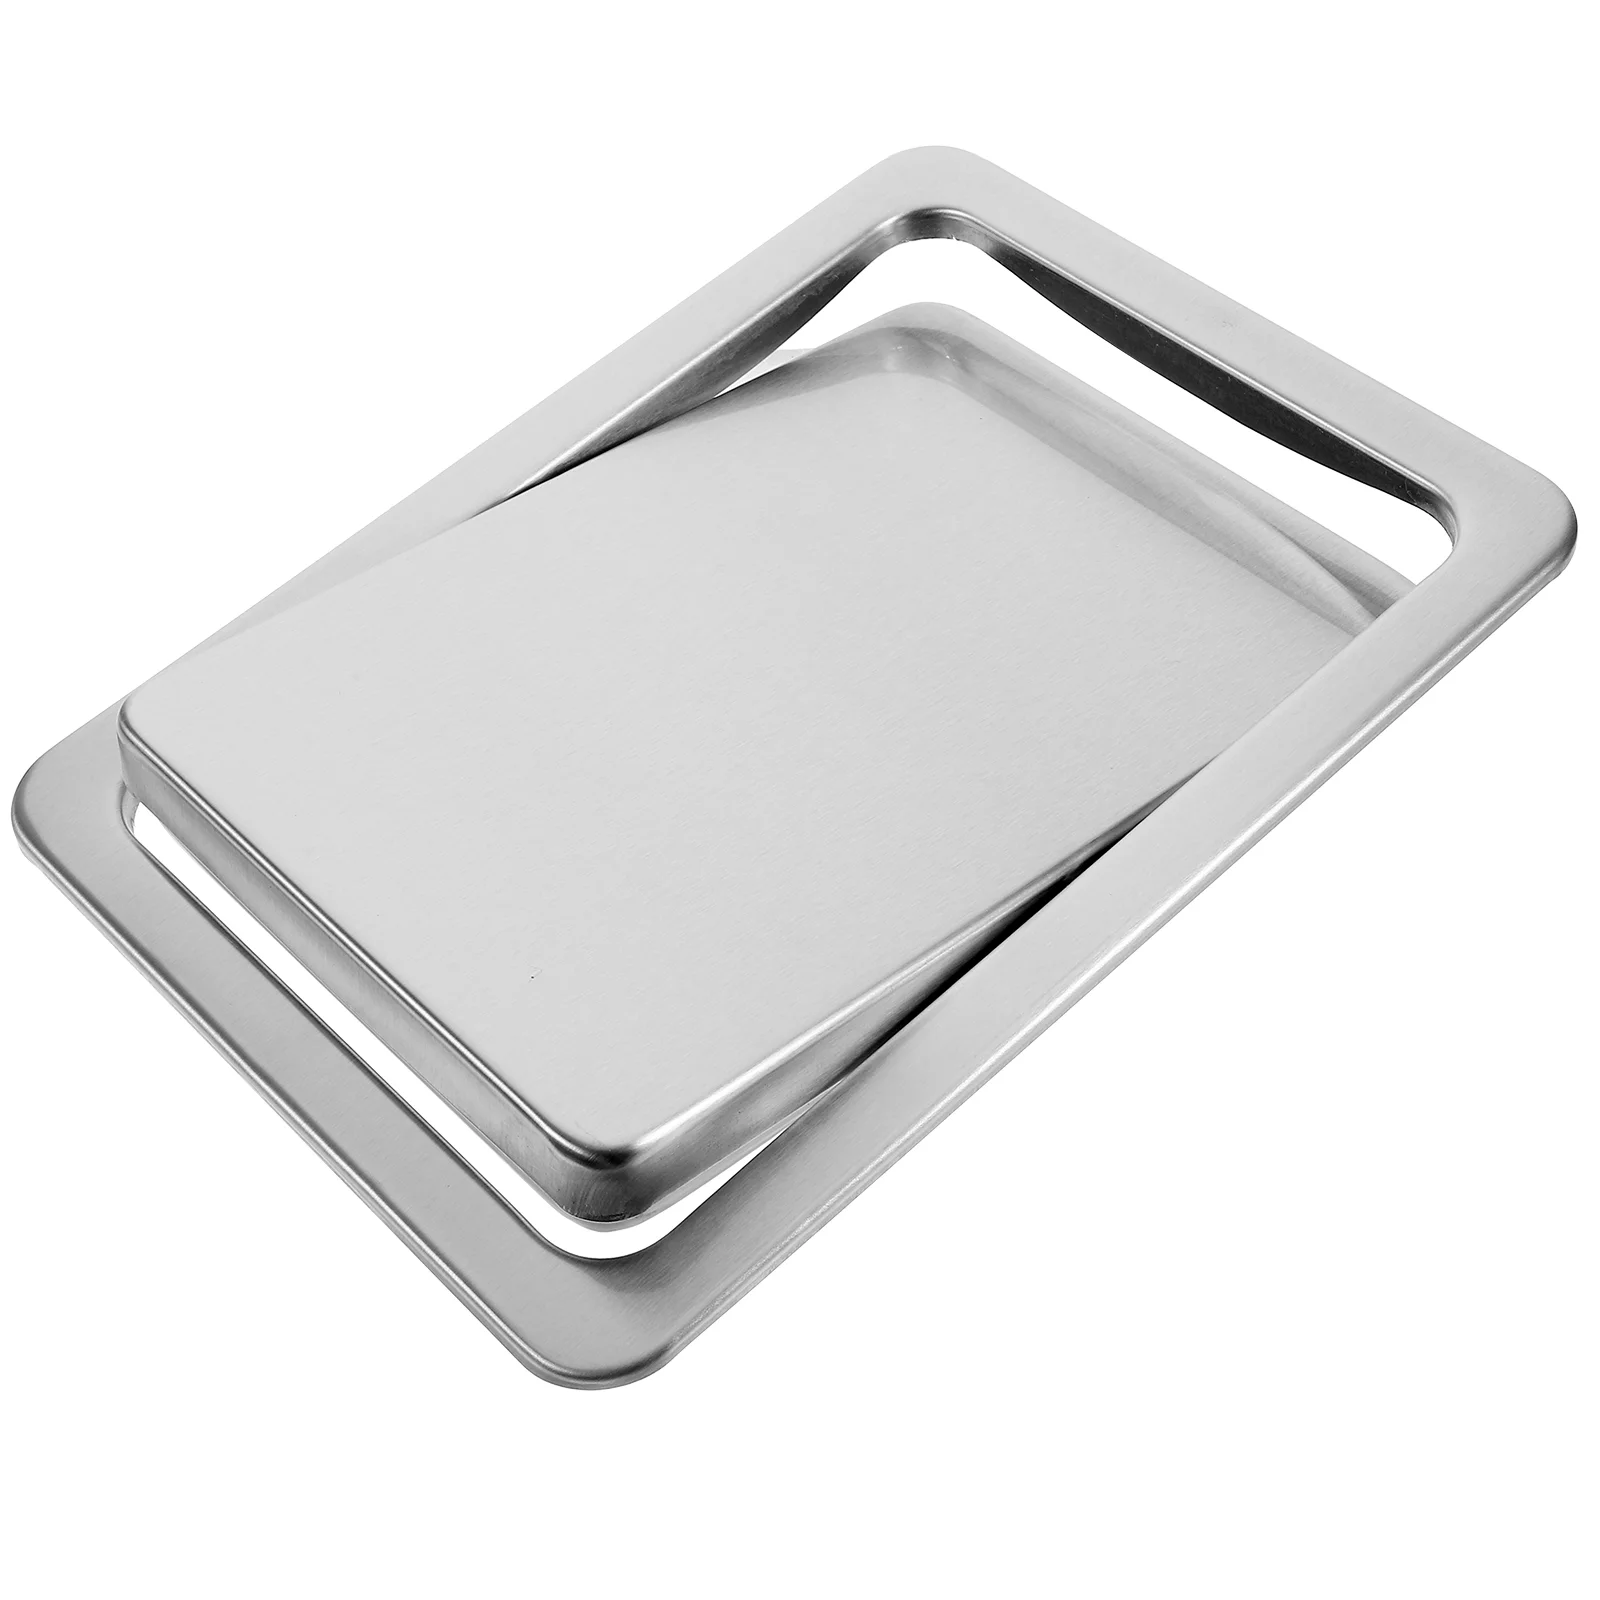 

Trash Bin Swing Flap Lid Embedded Type Stainless Steel Flush Built-in Balance Swing Flap Lid for Kitchen Removable under